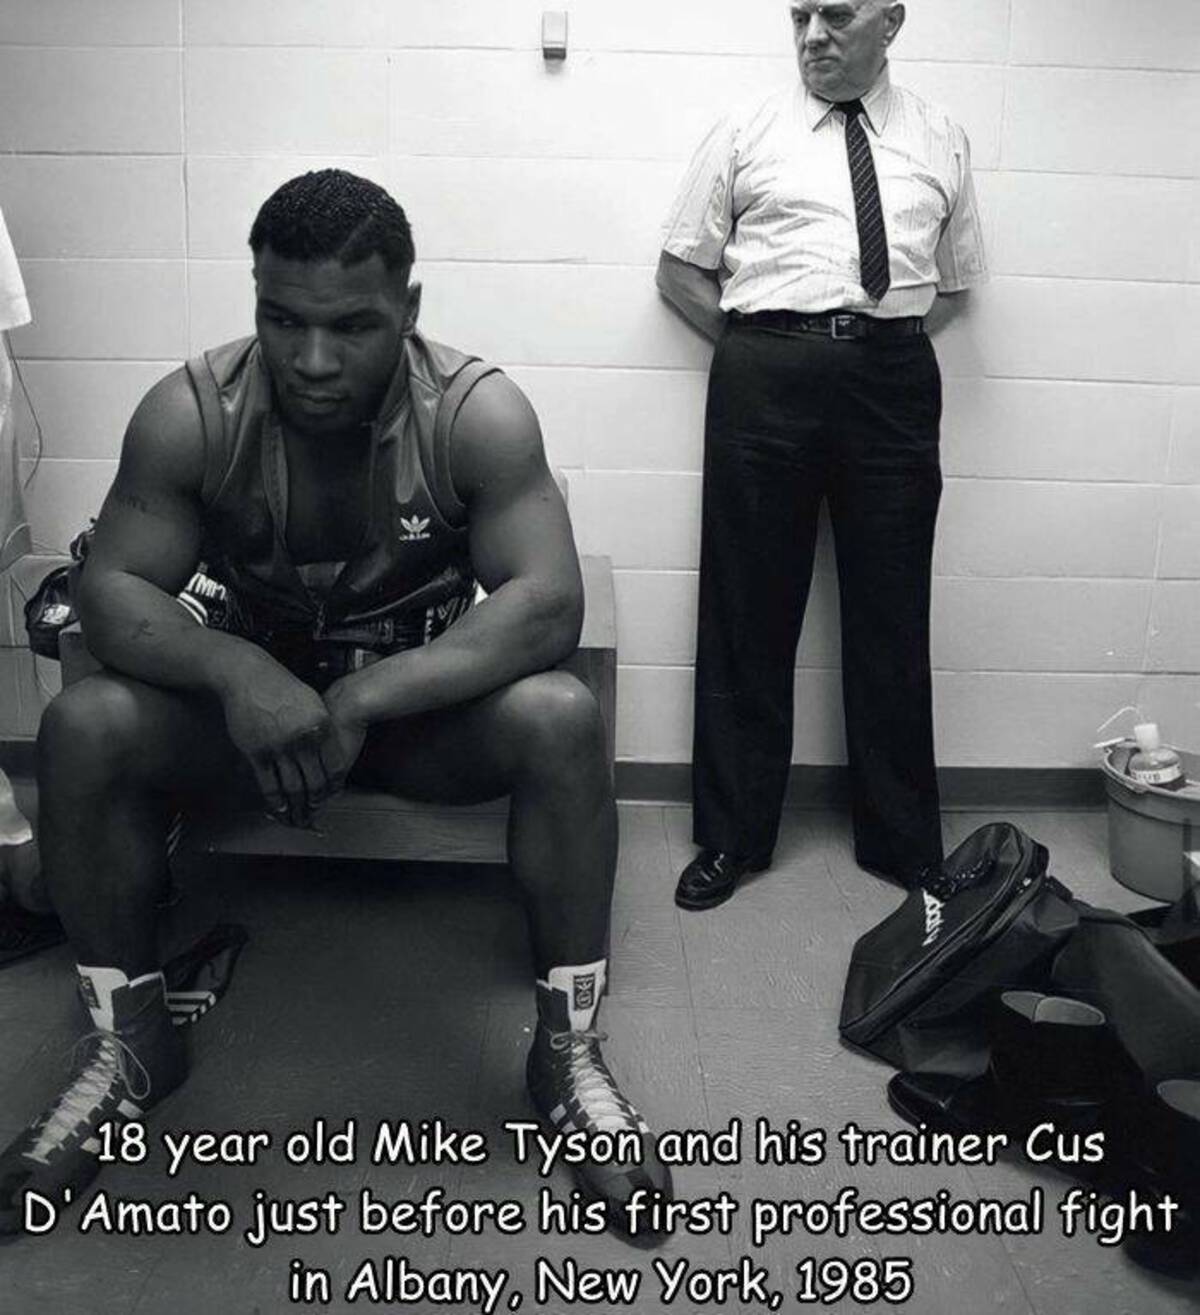 mike tyson cus d amato - 18 year old Mike Tyson and his trainer Cus D'Amato just before his first professional fight in Albany, New York, 1985